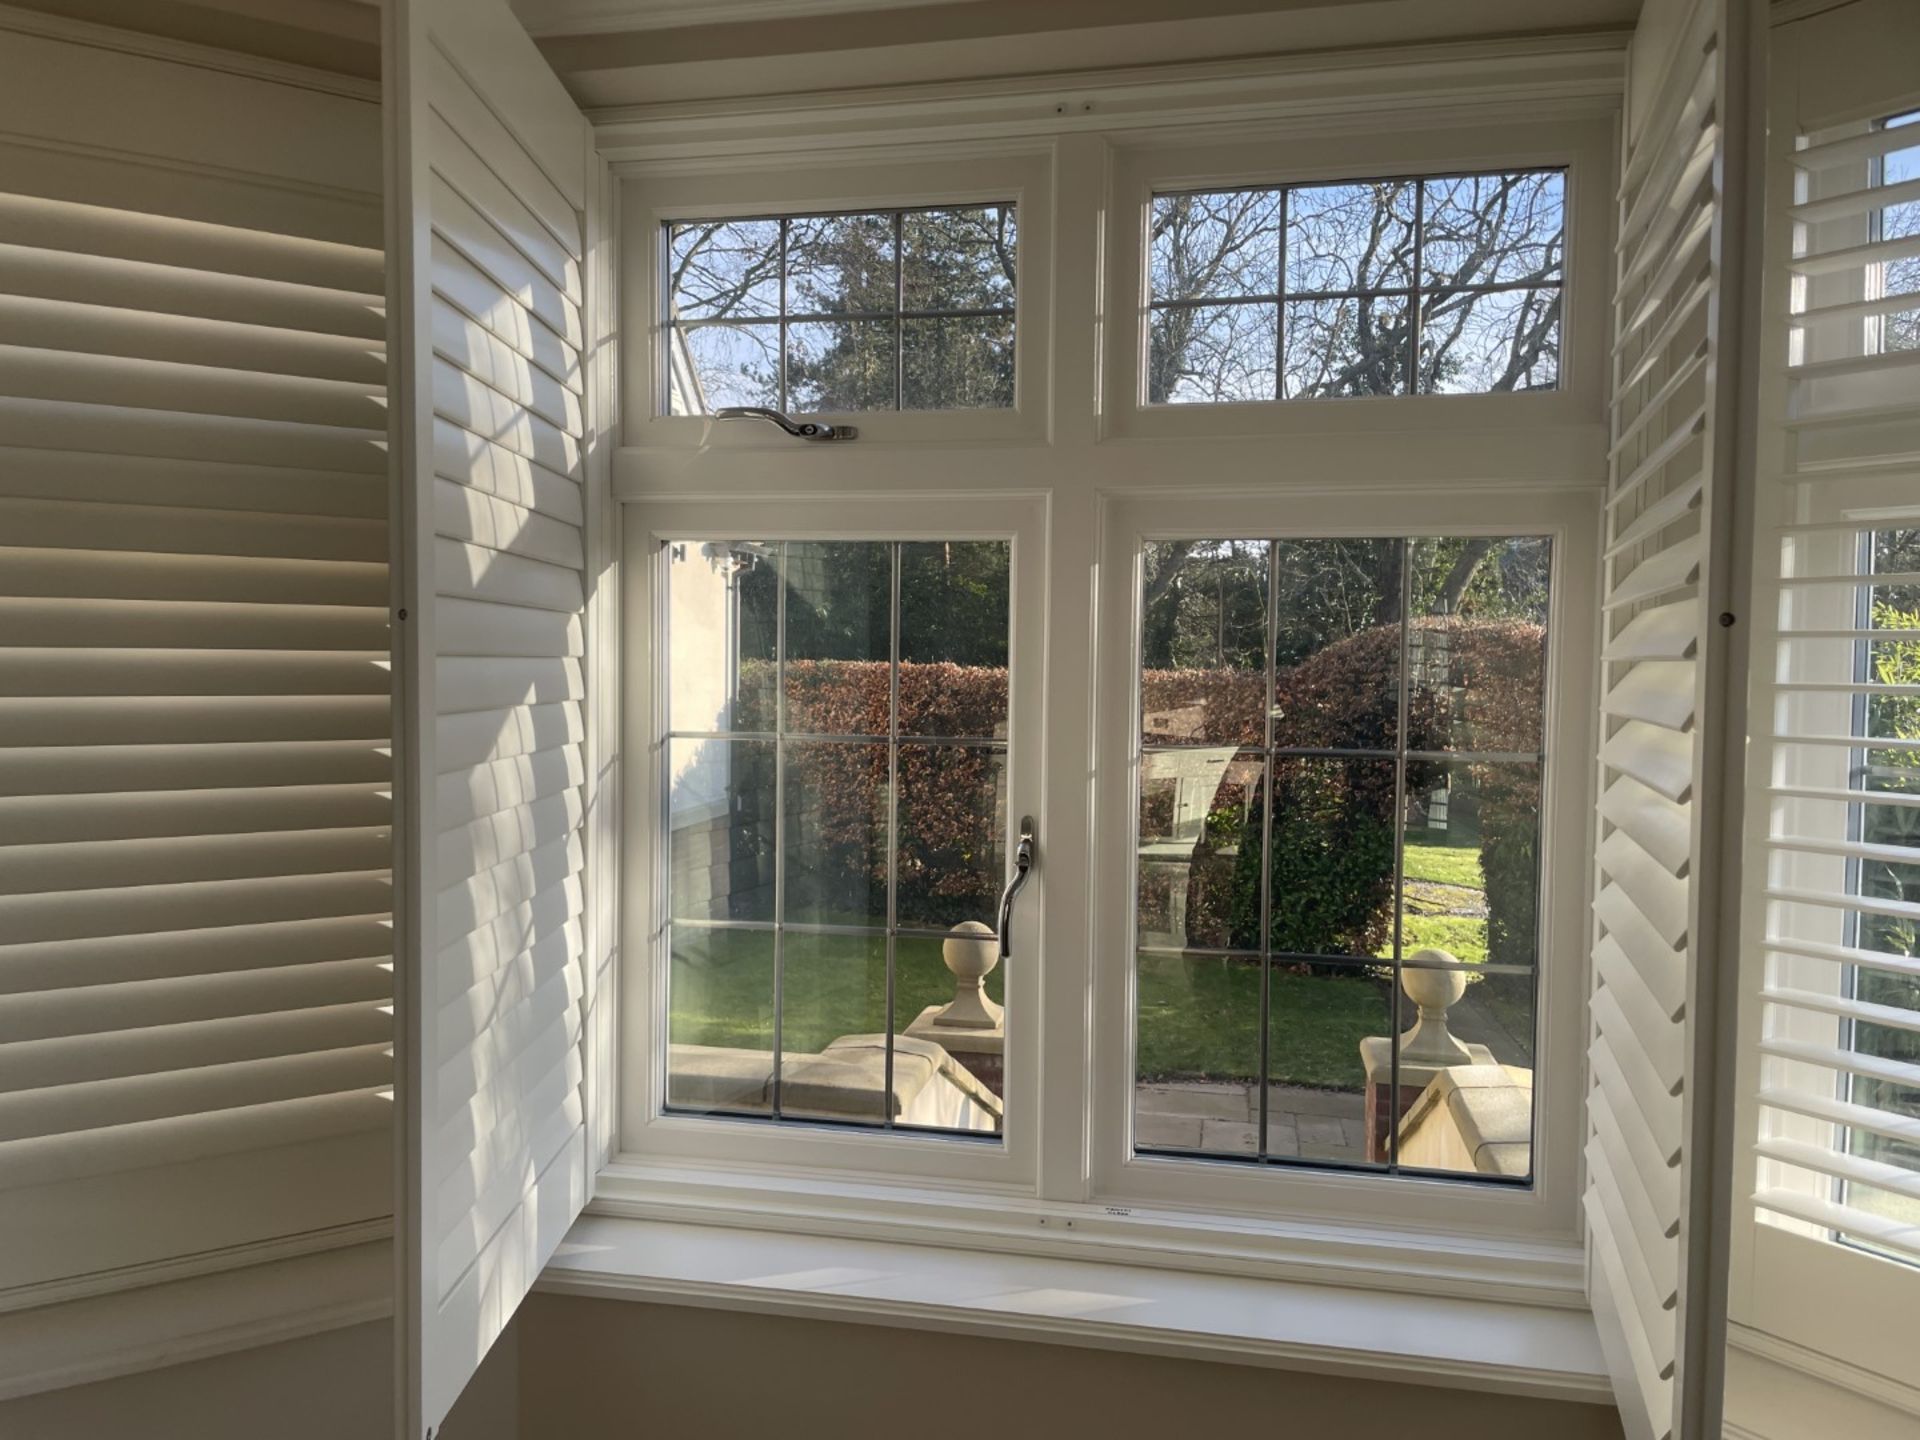 1 x Hardwood Timber Double Glazed Window Frames fitted with Shutter Blinds, In White - Ref: PAN101 - Image 10 of 23